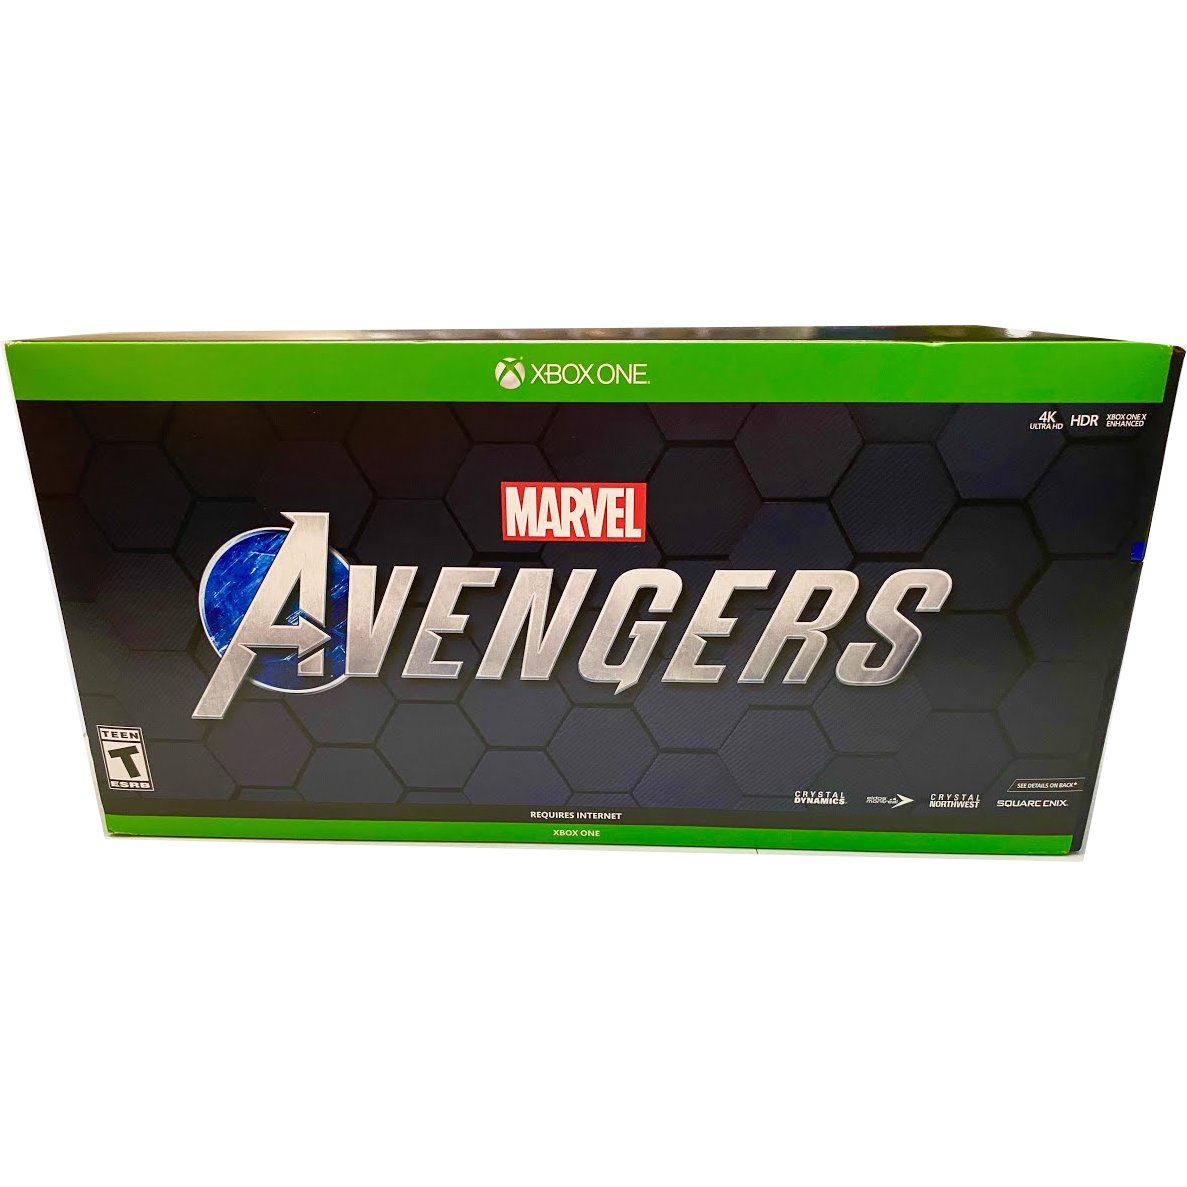 Xbox One - Marvel Avengers Earth's Mightiest Edition